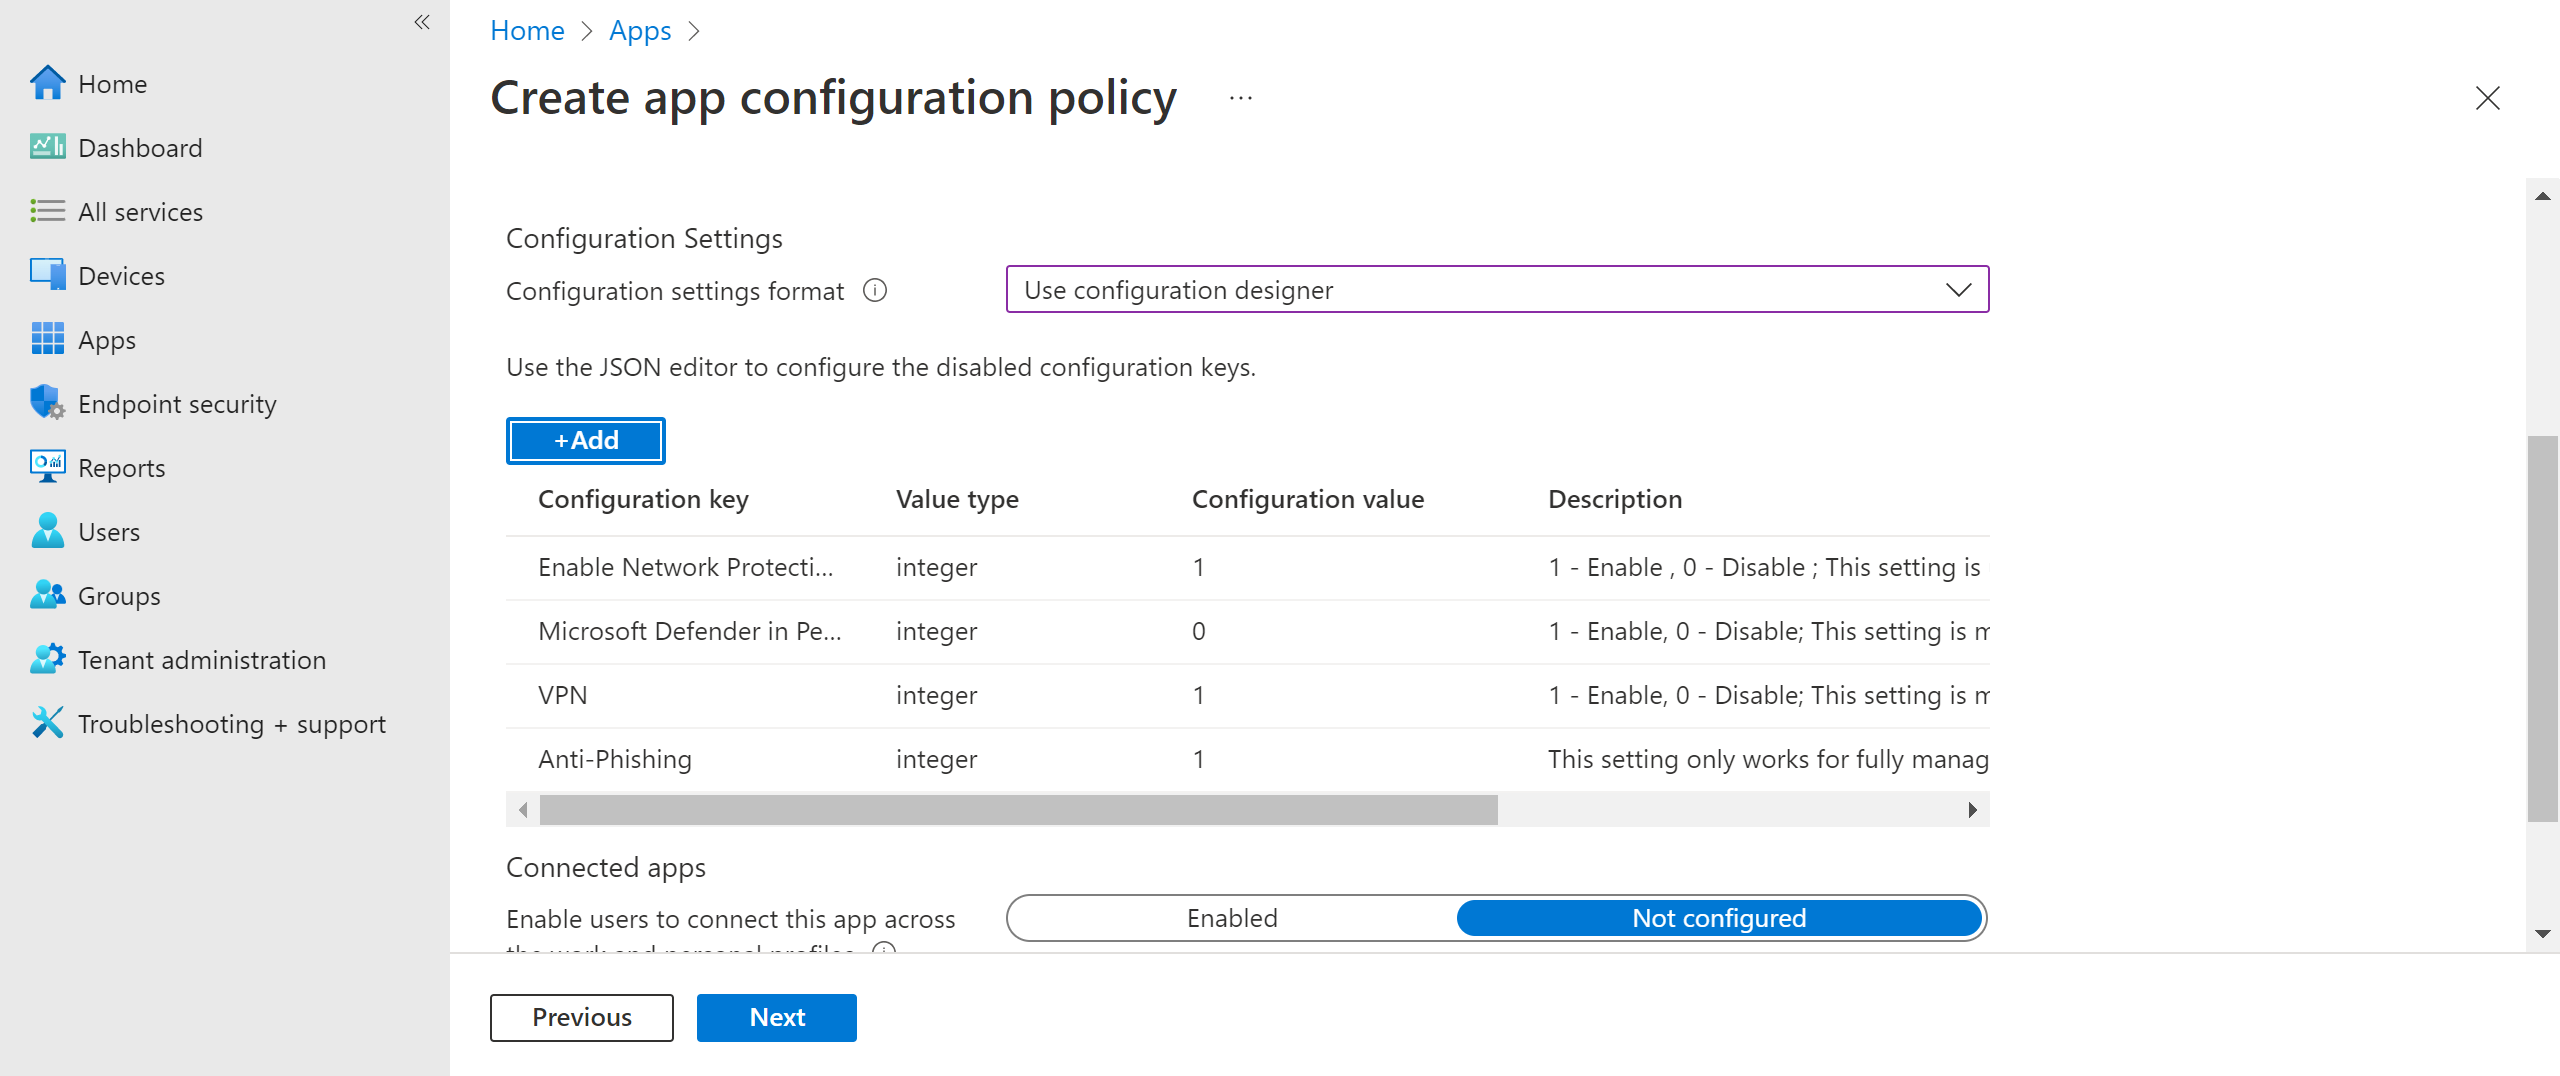 Image of selected configuration policies.